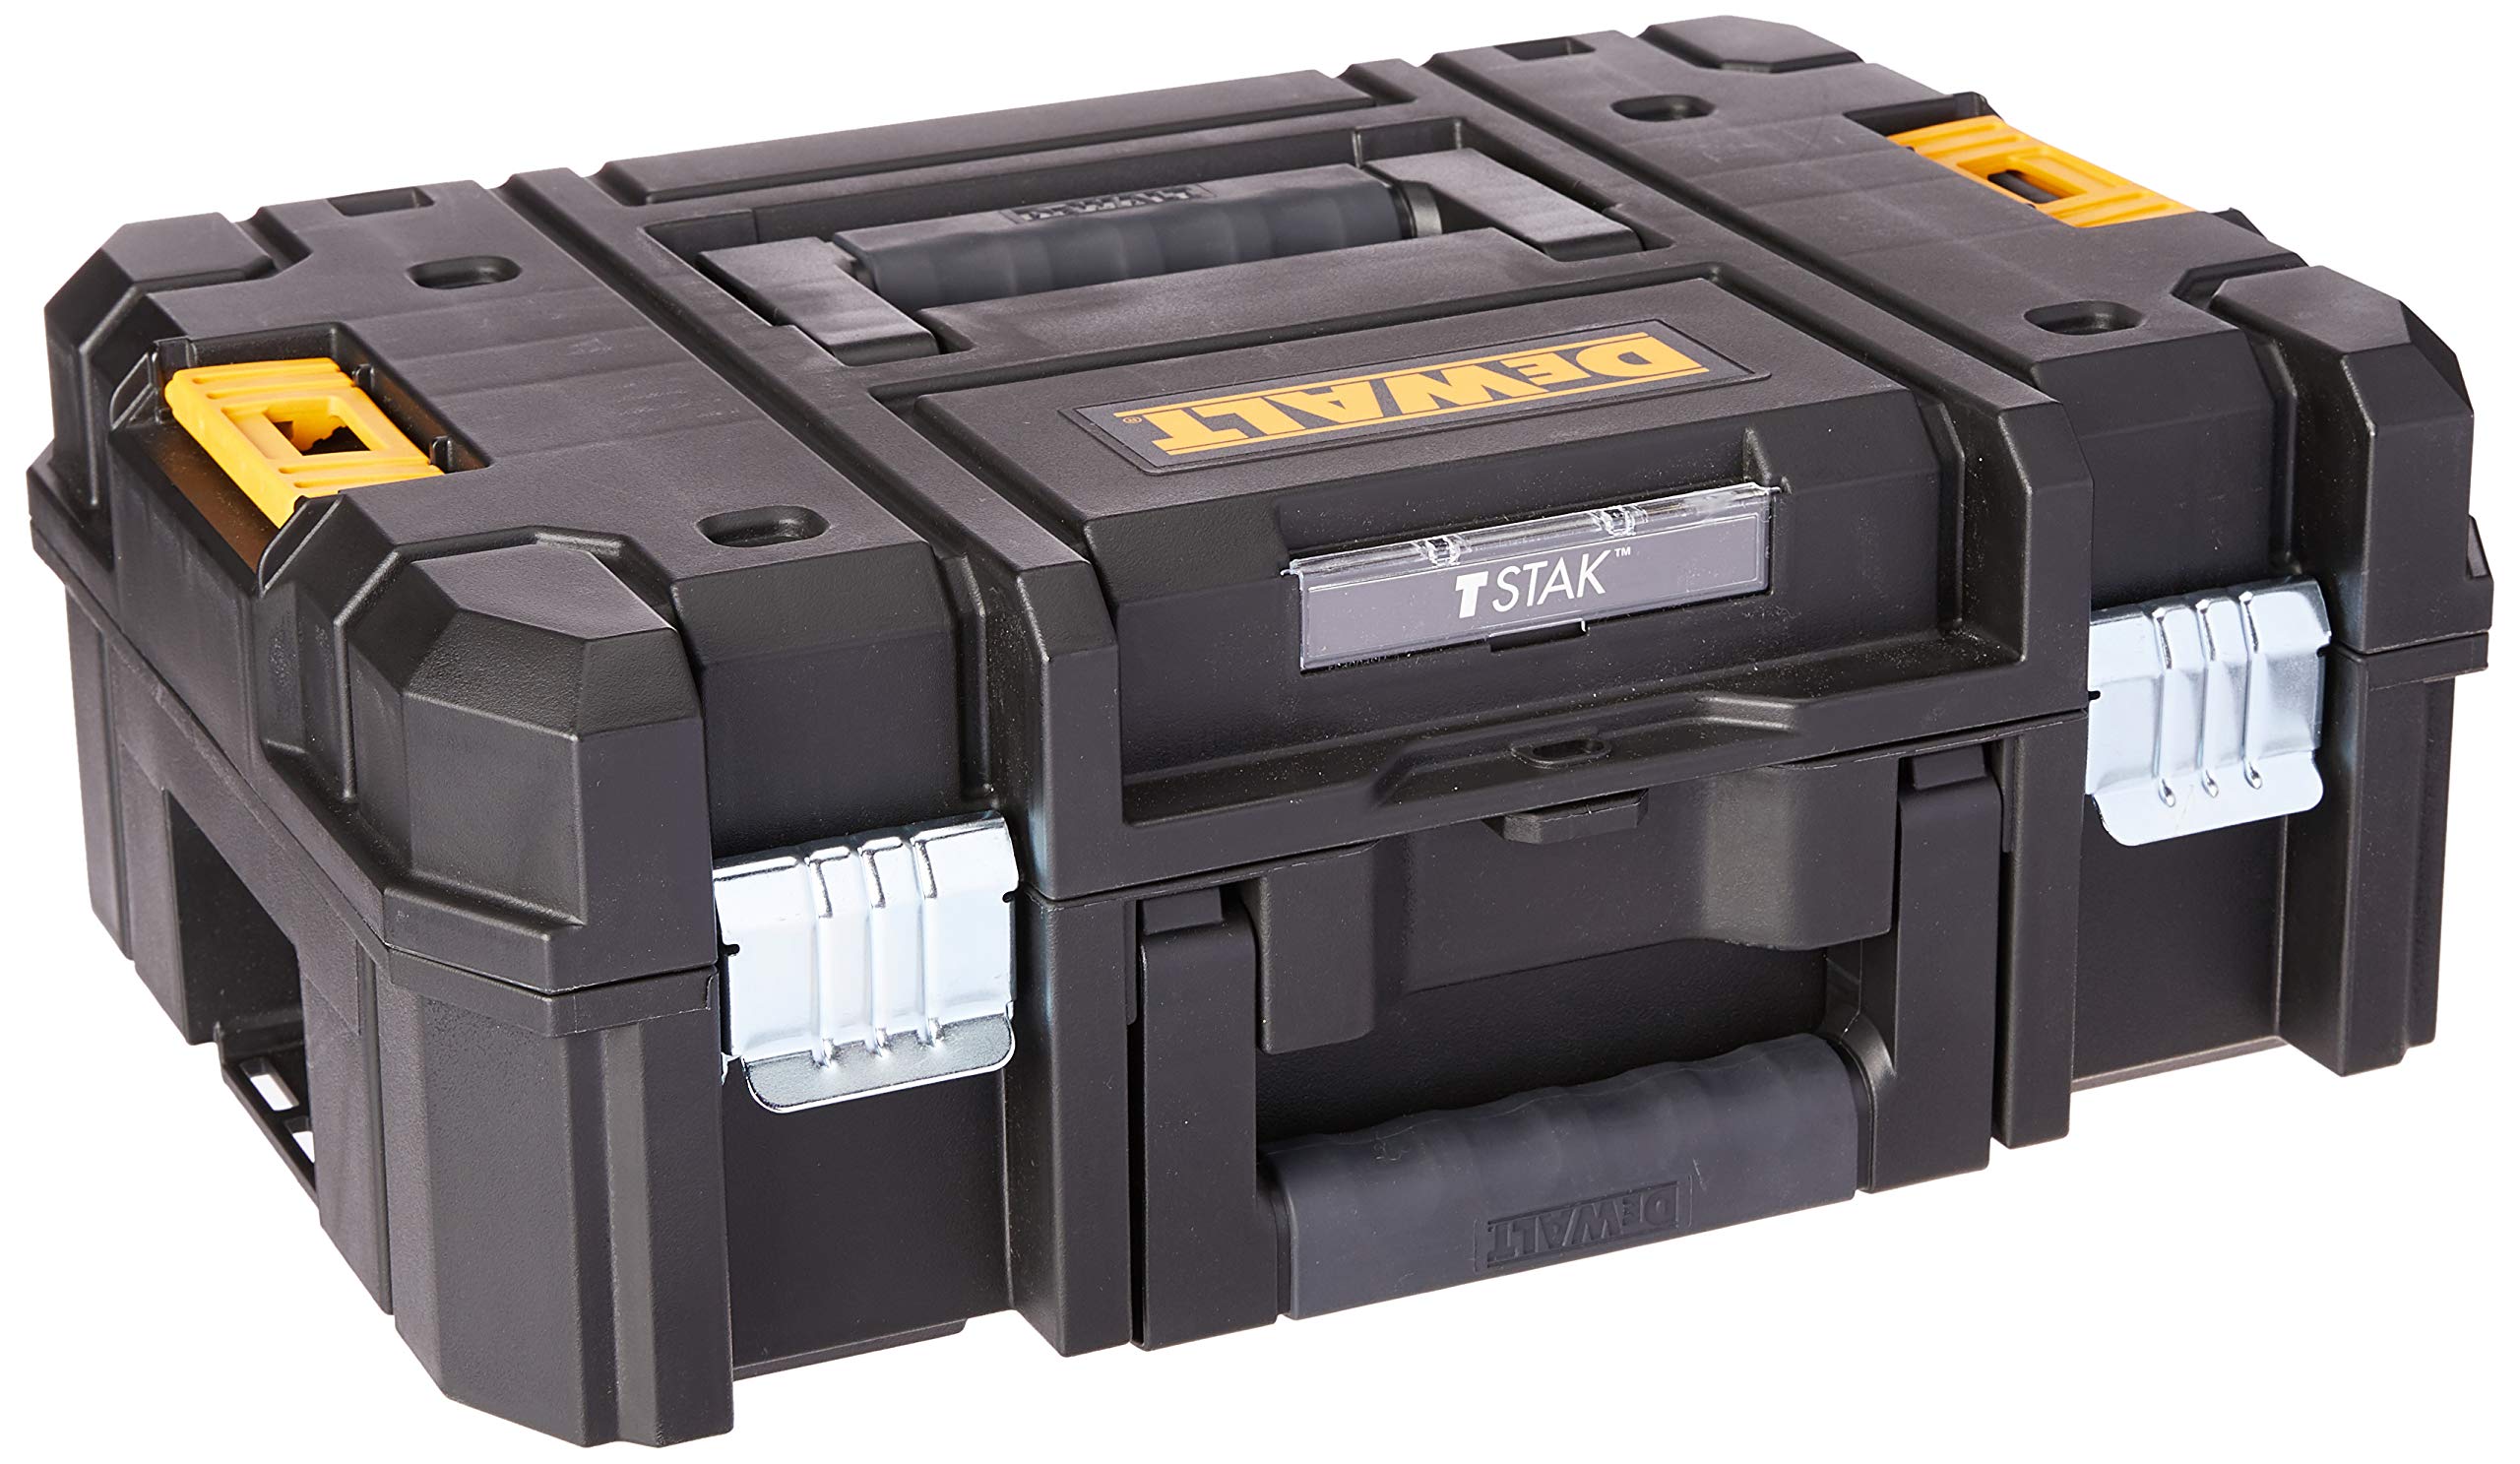 Limited-time deal: DEWALT TSTAK II Tool Box, 13 Inch, Flat Top, Holds Up To 66 lbs, Flexible Platforms for Stacking (DWST17807) $17.99 @Amazon